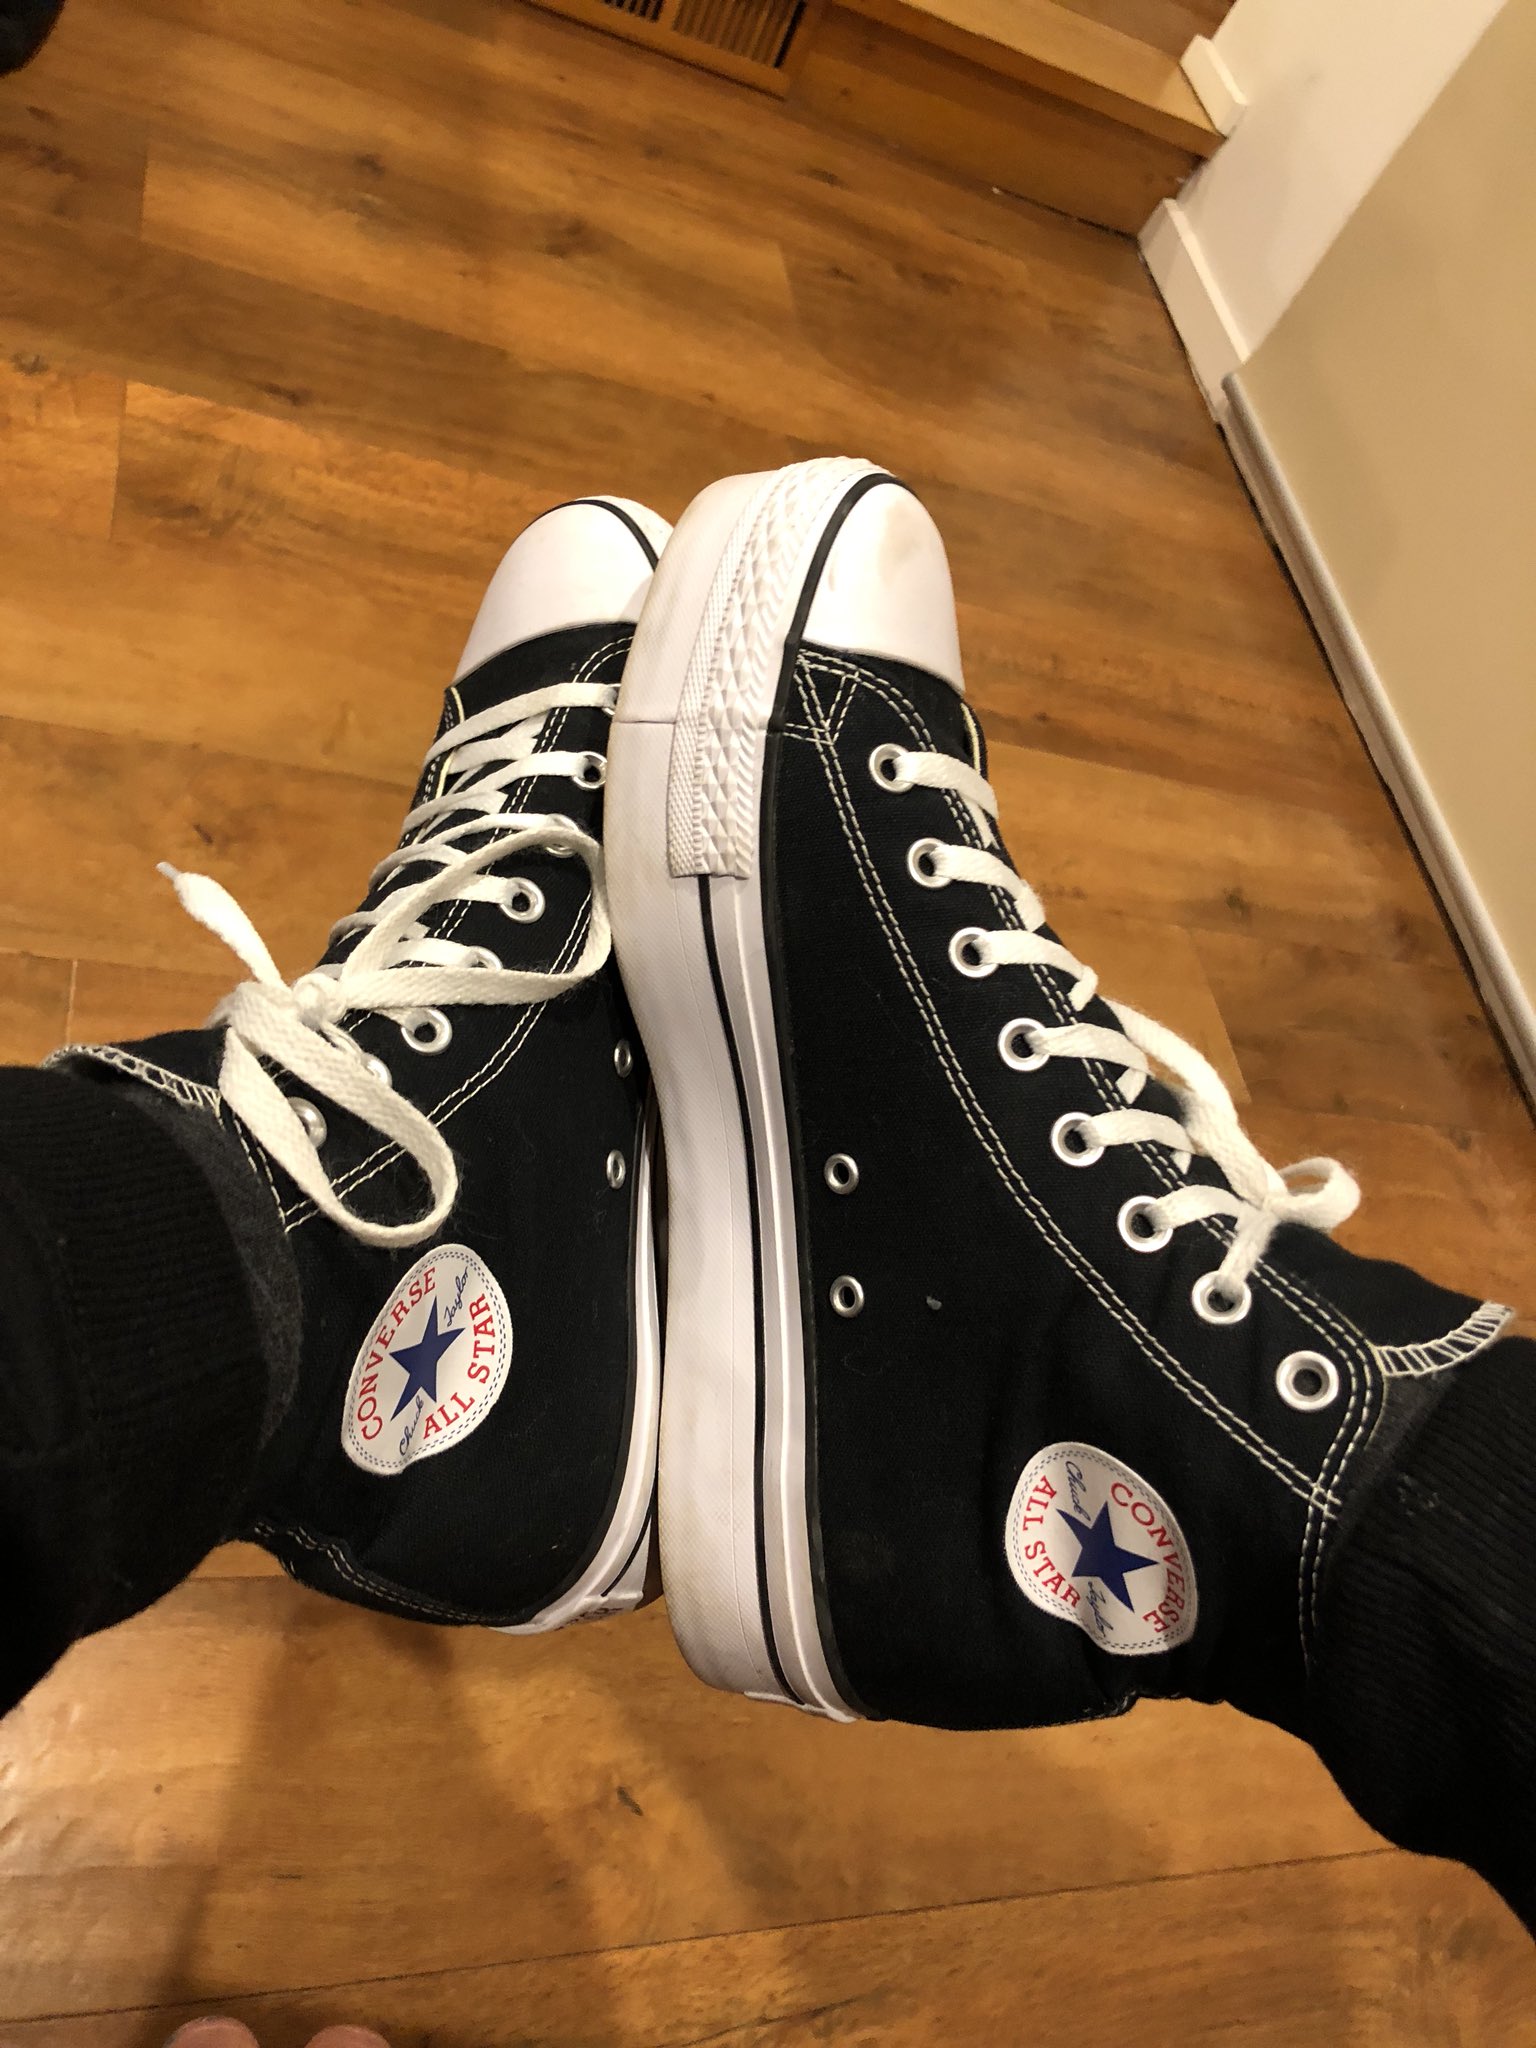 SNKRADMR on X: spunky girls own Converse or sneakers &amp; interested in a paid KIK session (making me wear my girly platforms!? # converse #conversefetish #sneakerfetish https://t.co/suPuDtQXMp" / X